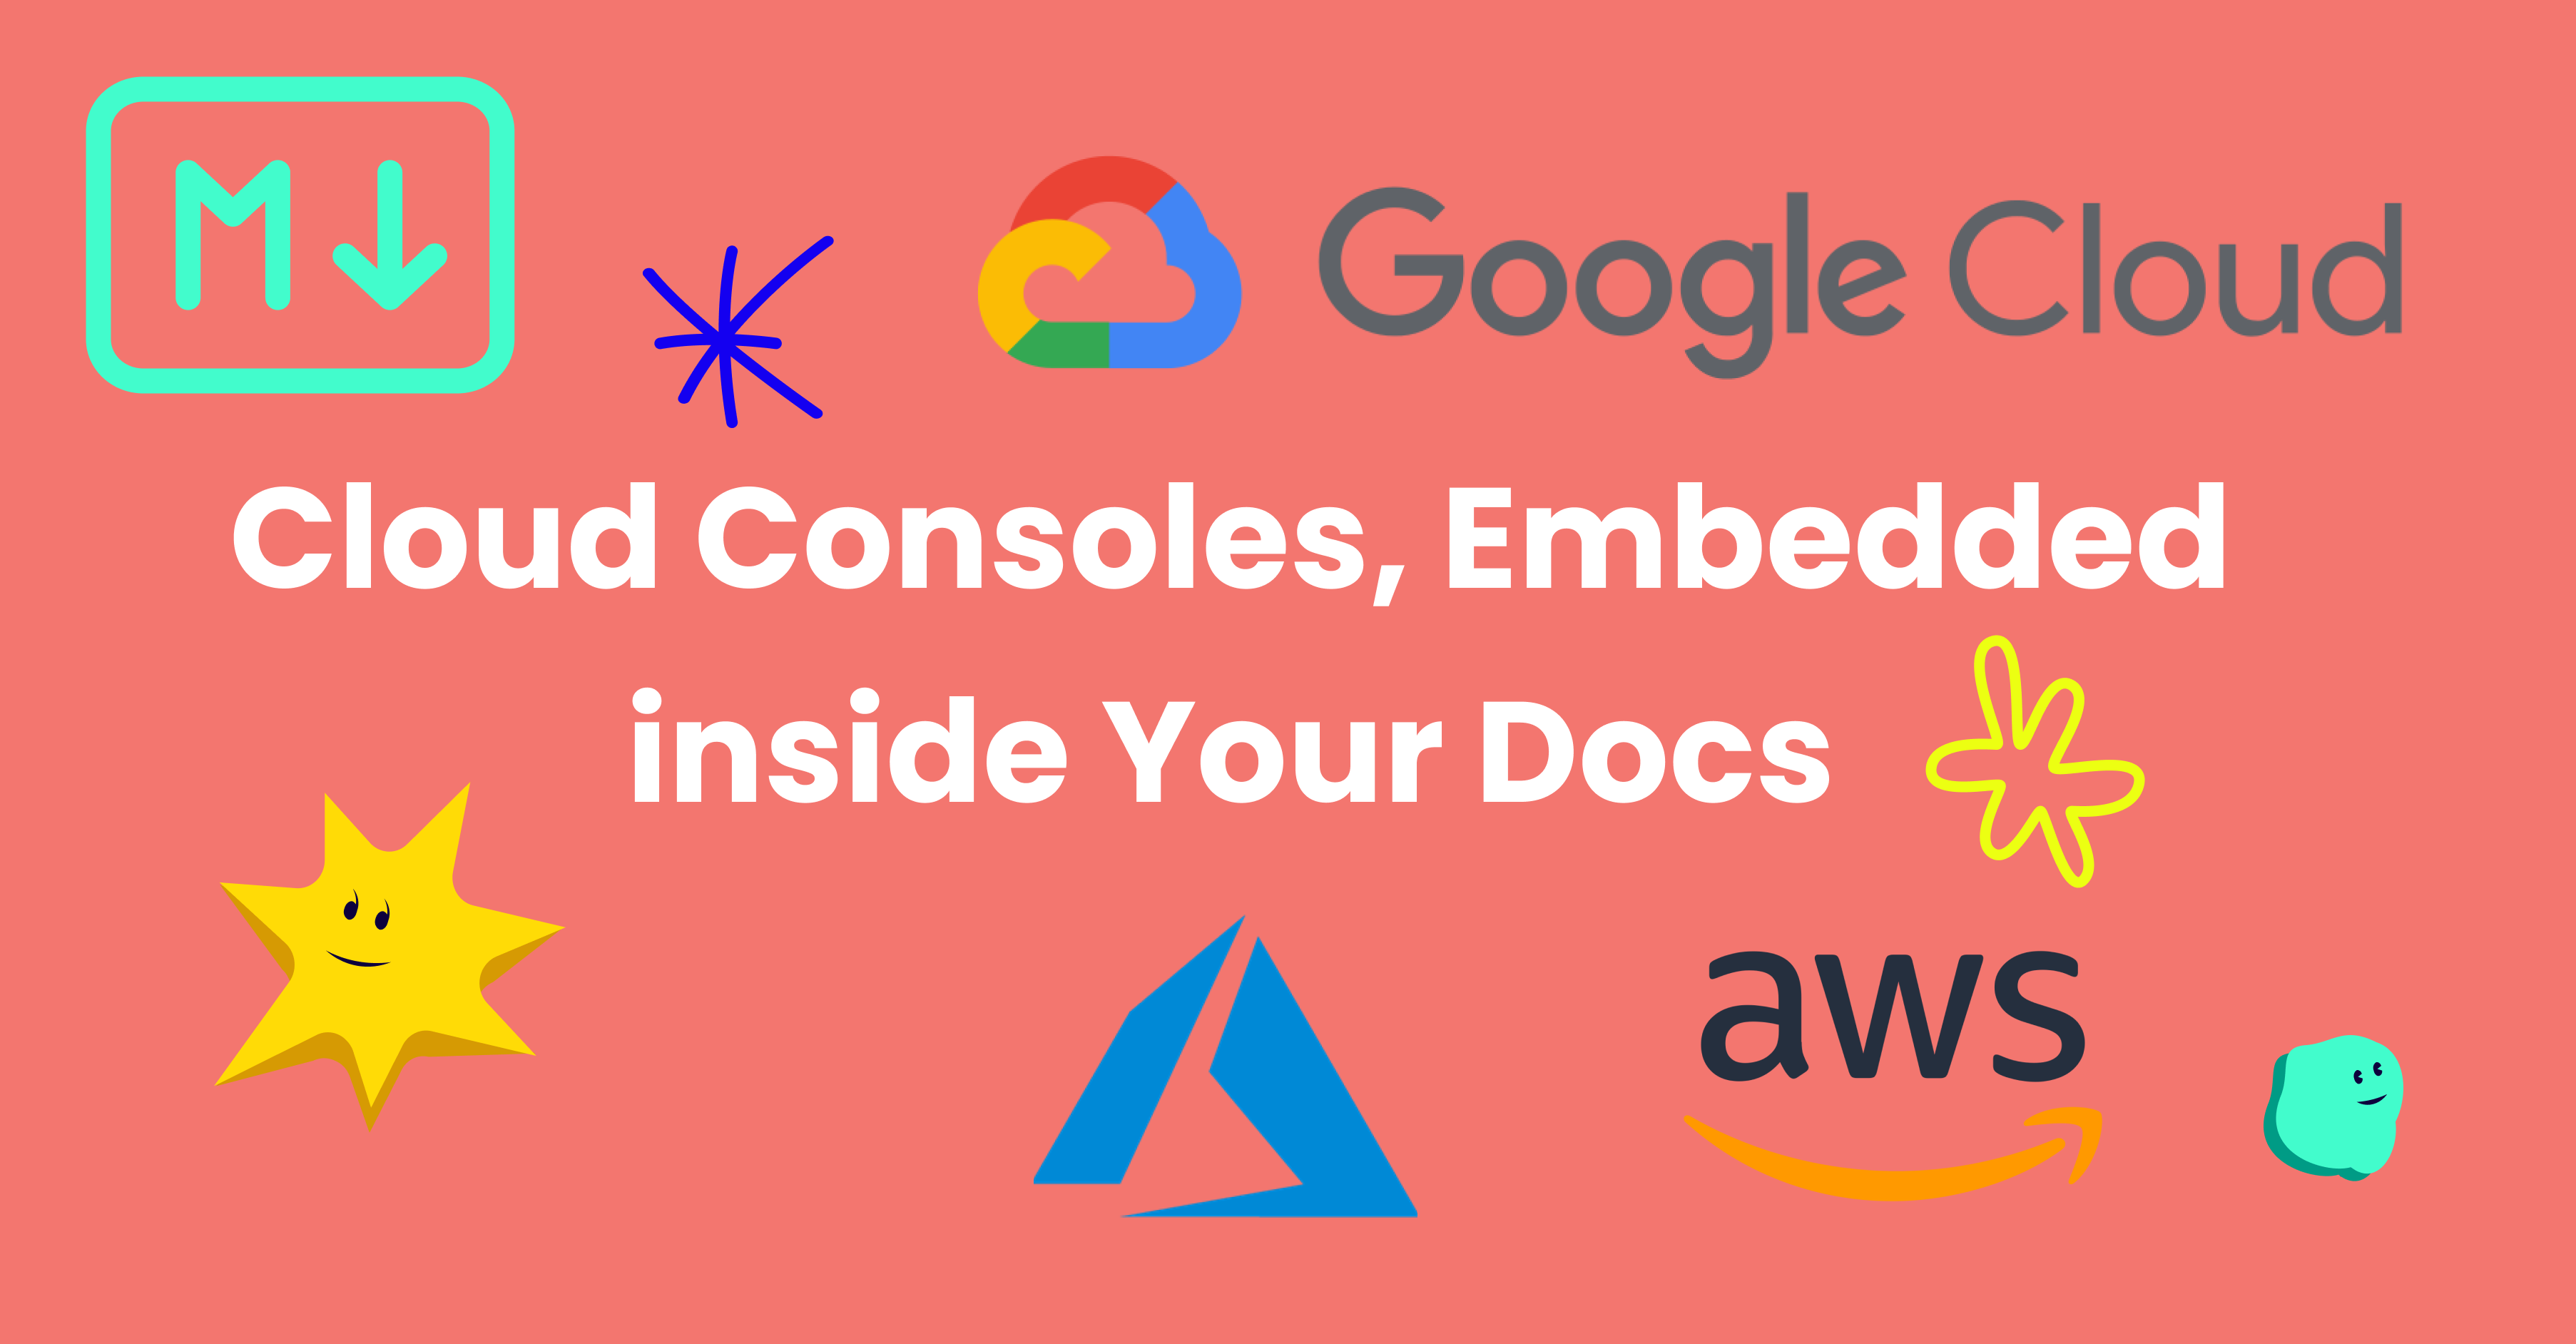 Cloud Consoles, Embedded inside Your Docs